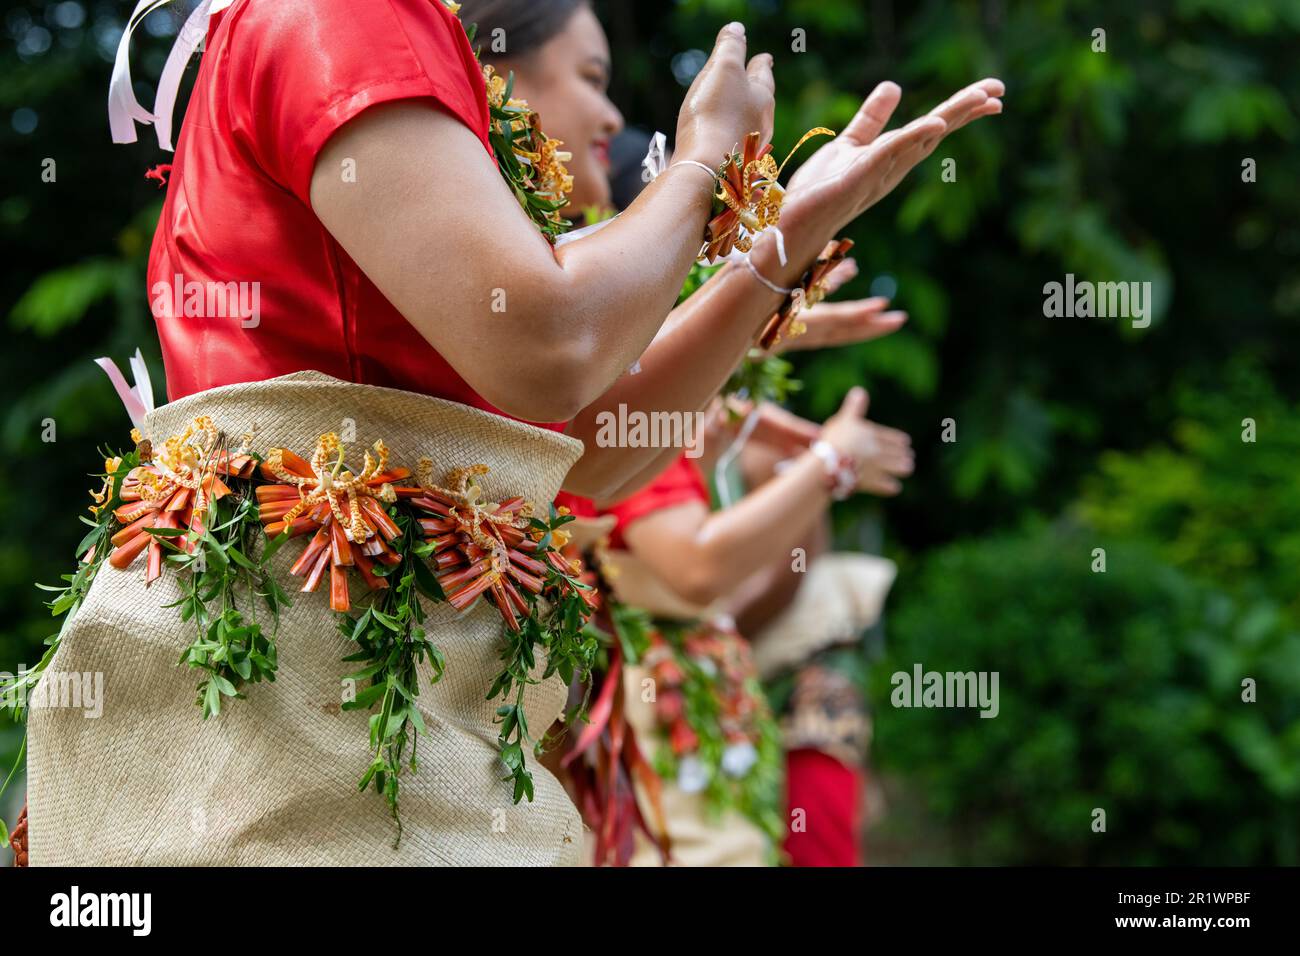 Kingdom of Tonga, Neiafu. Traditional welcome dancers in typical taʻovala, woven mat skirt worn by both men and women. Stock Photo